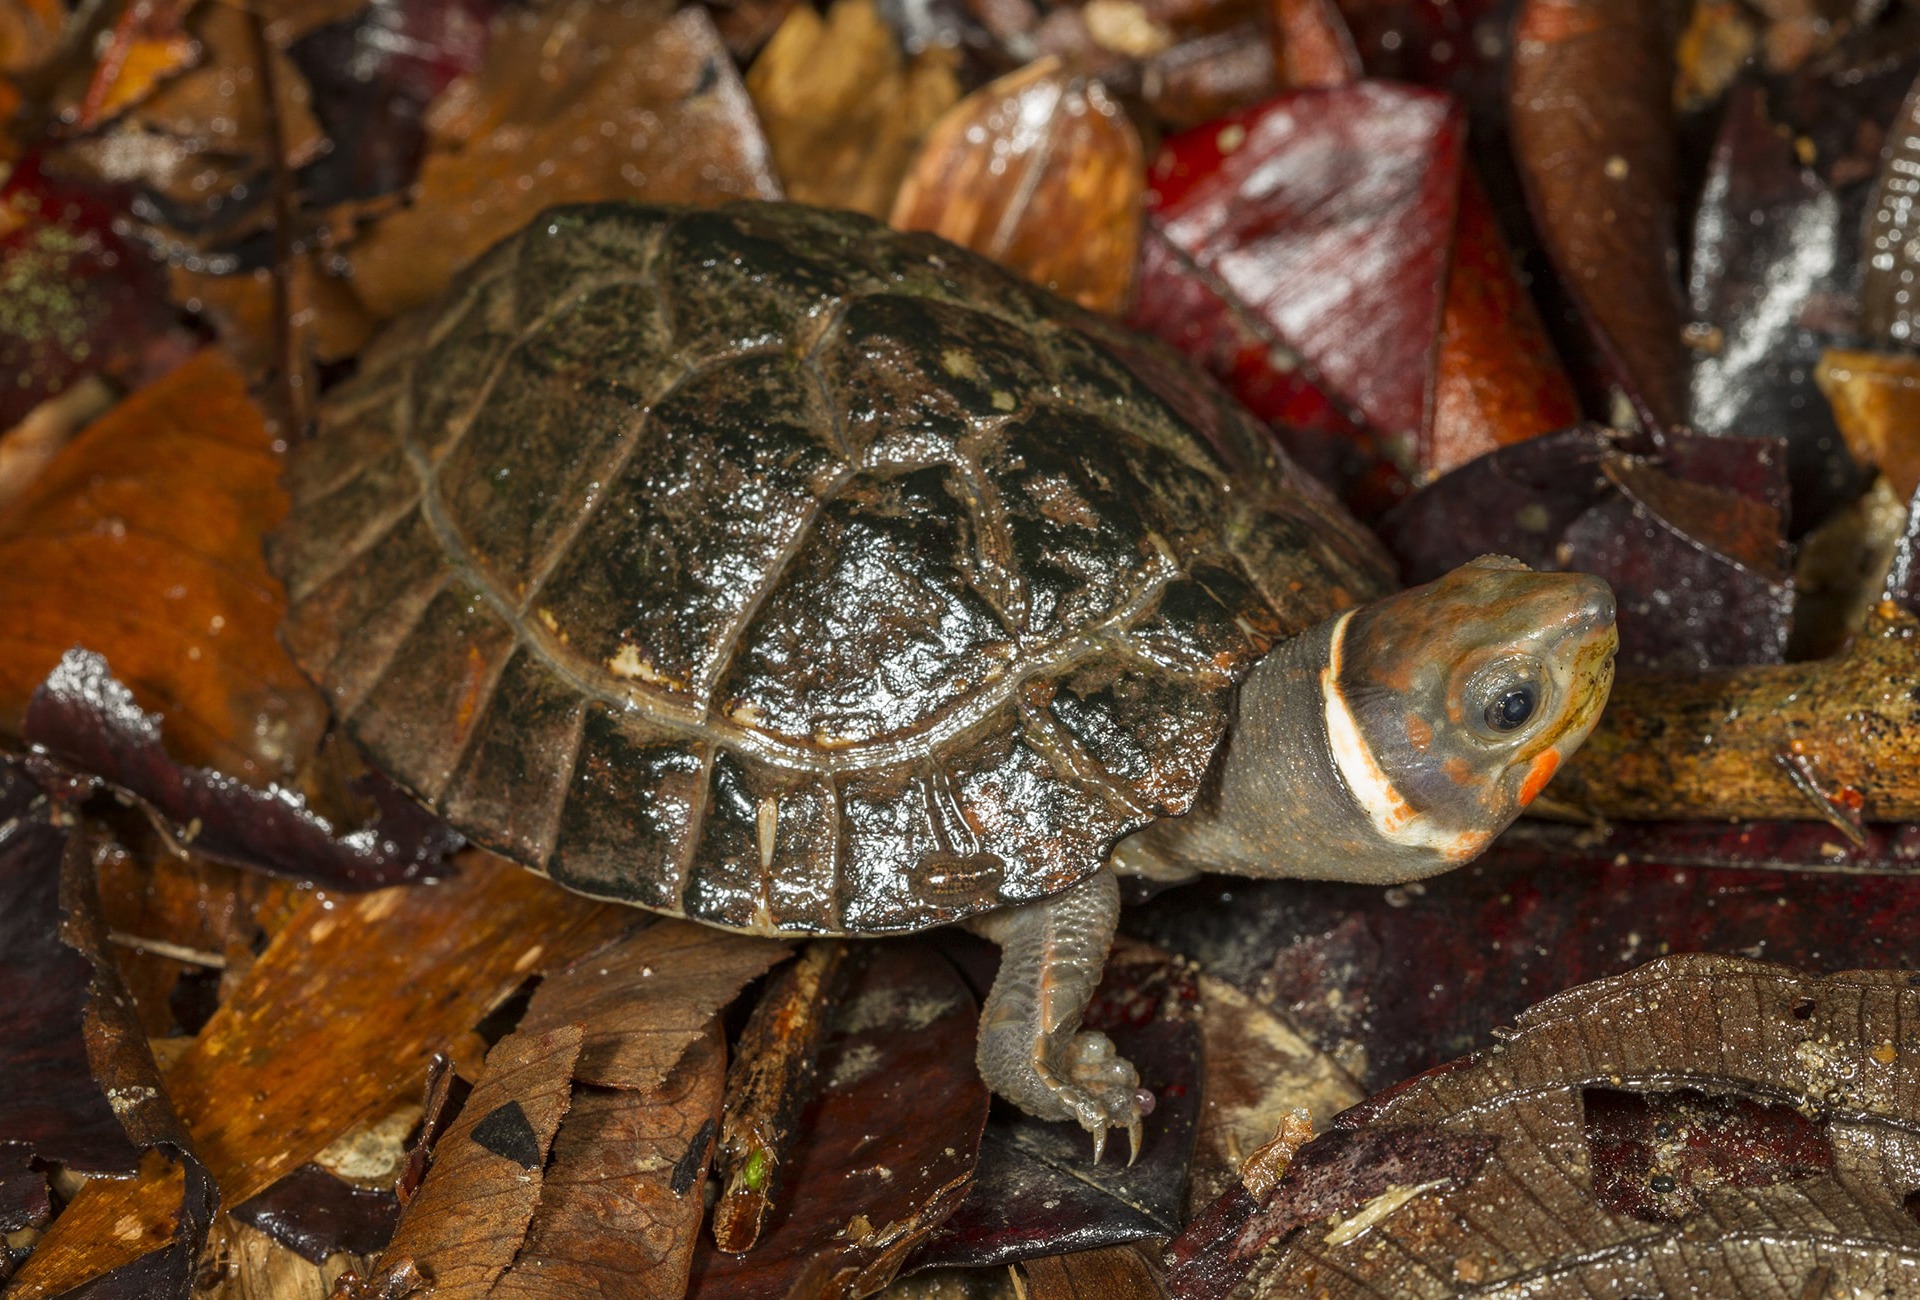 The Palawan Forest Turtle, courtesy of N. Cegalerba and J. Szwemberg